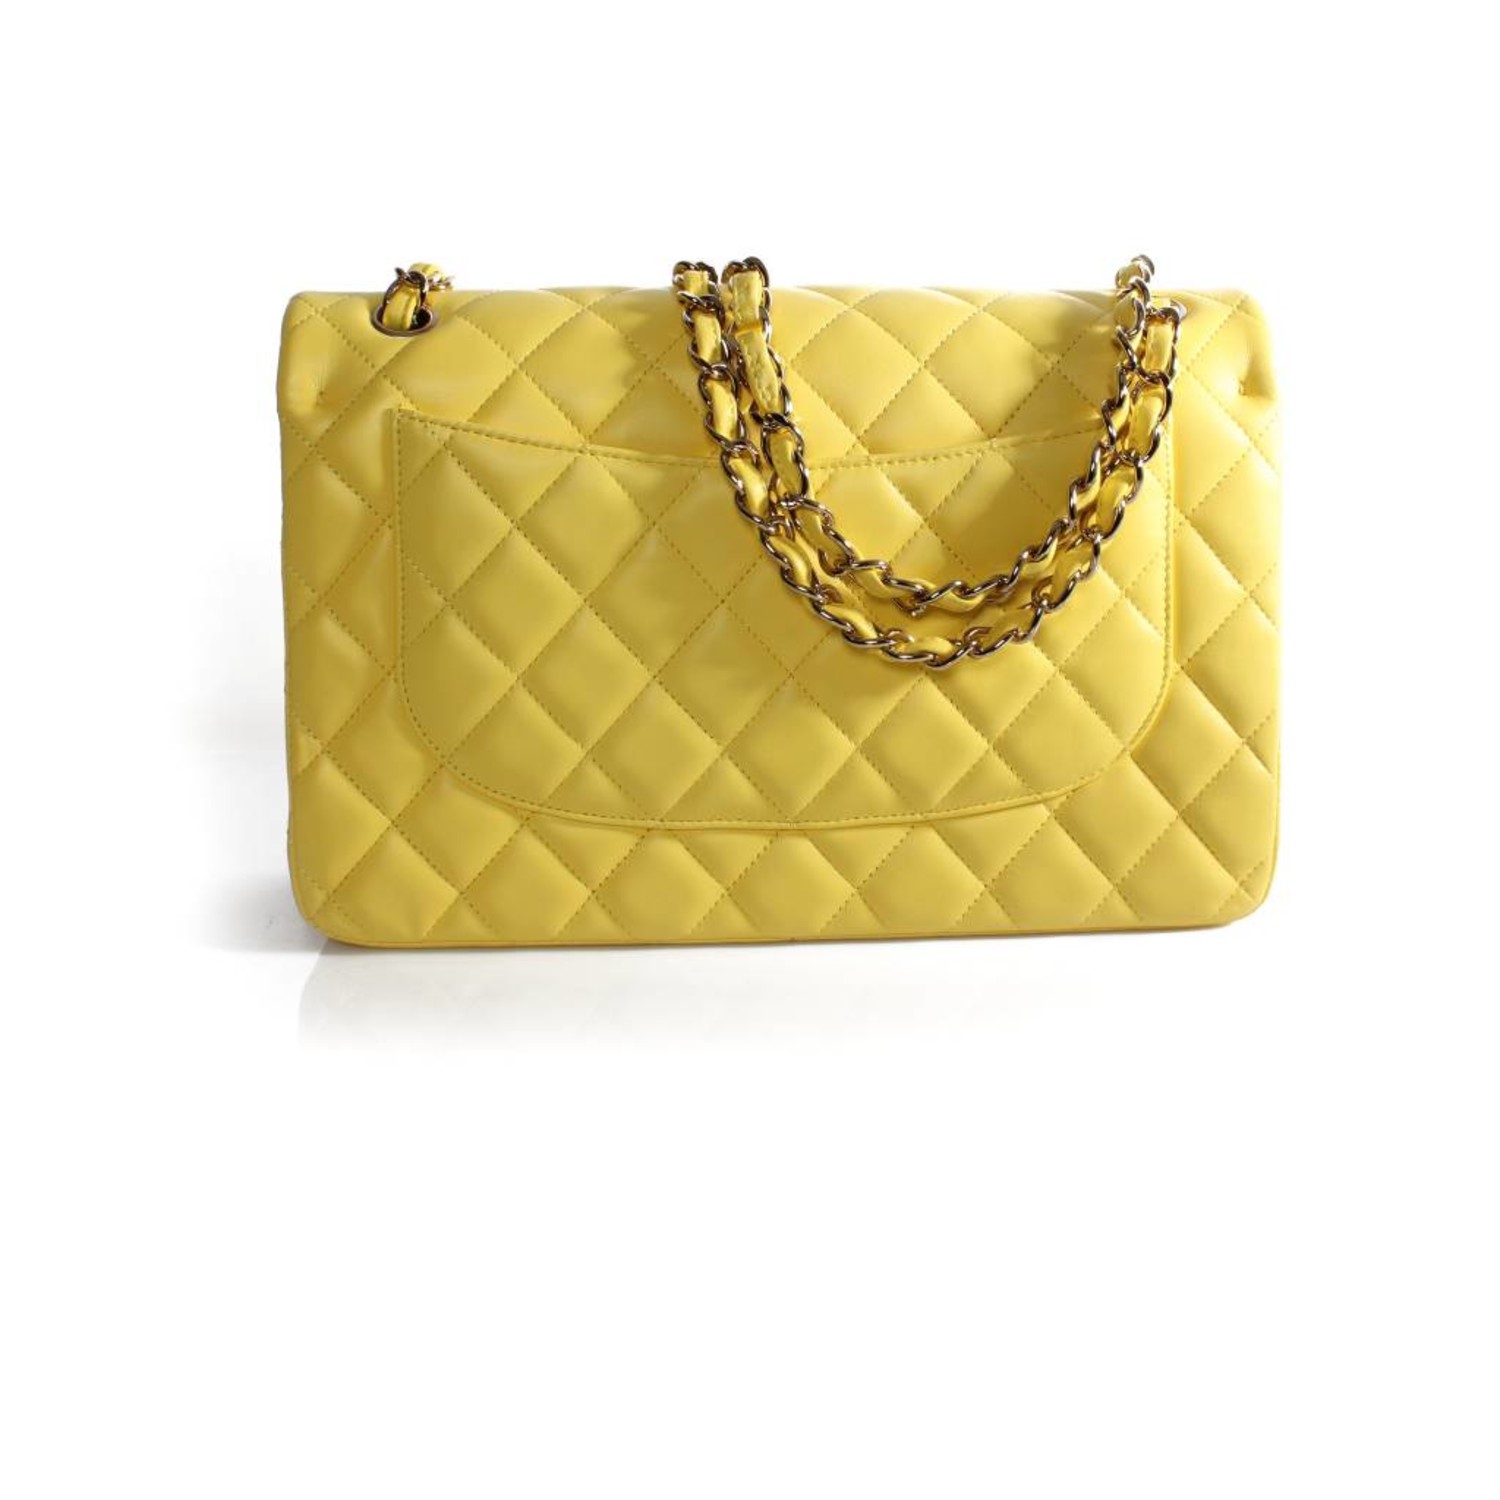 Chanel, Jumbo Classic 2.55 double flap bag in bright yellow - Unique  Designer Pieces